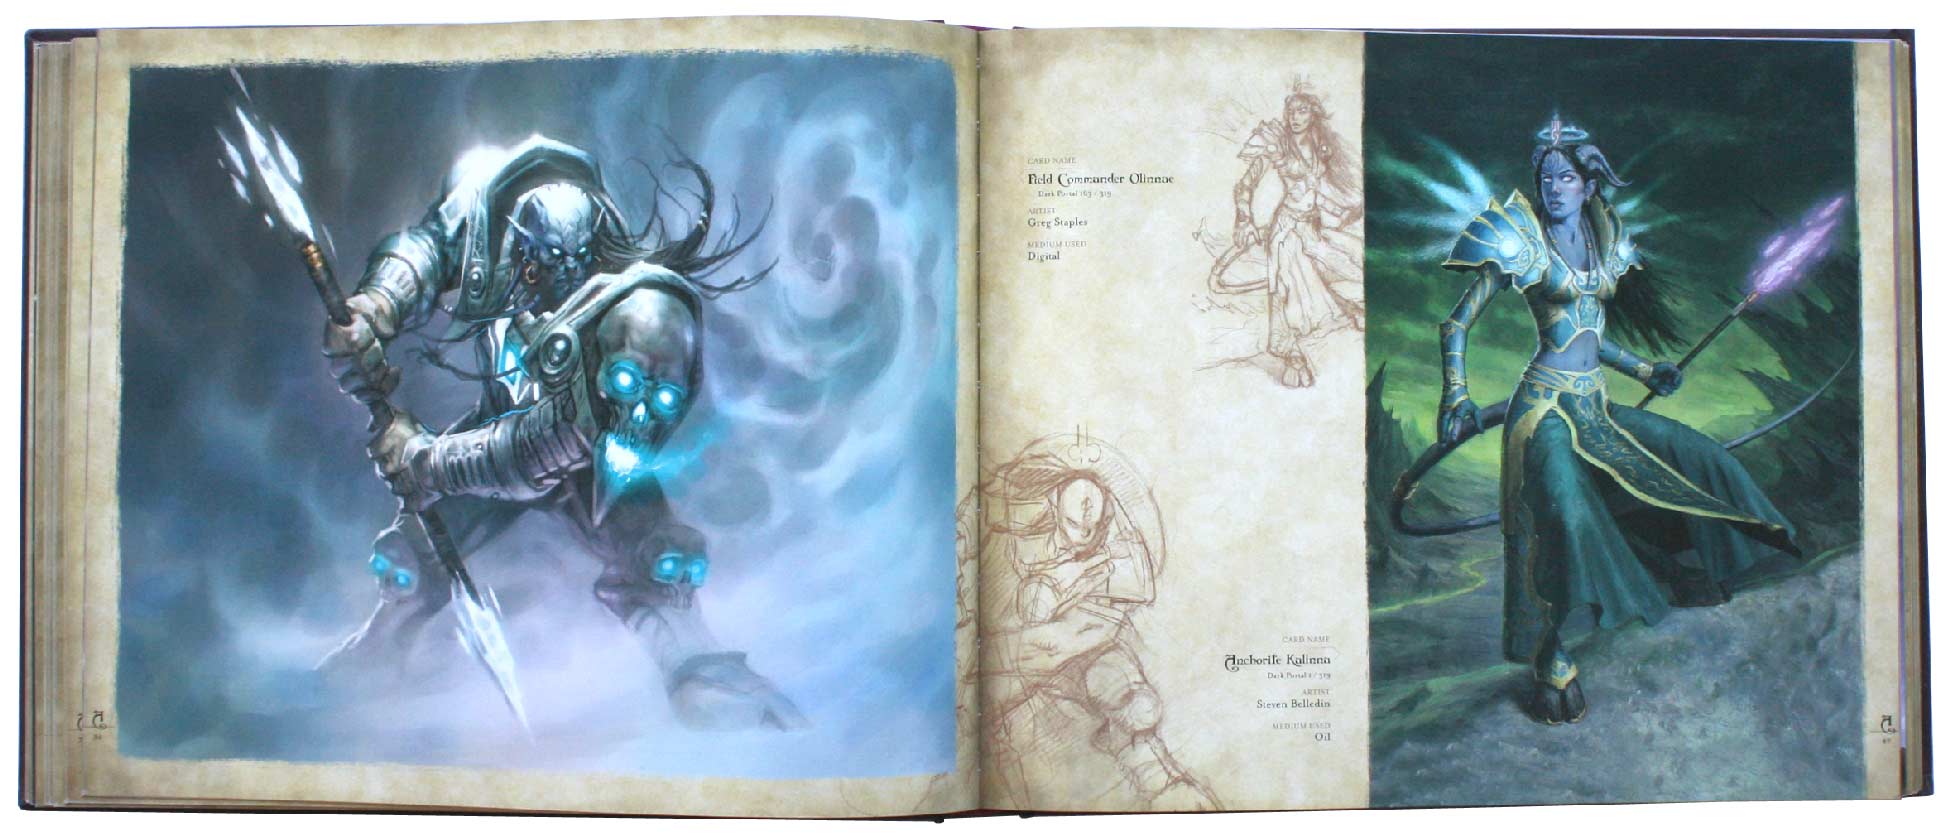 page 86 et 87 de l'art book : The Art of the Trading Card Game (World of Wacraft)